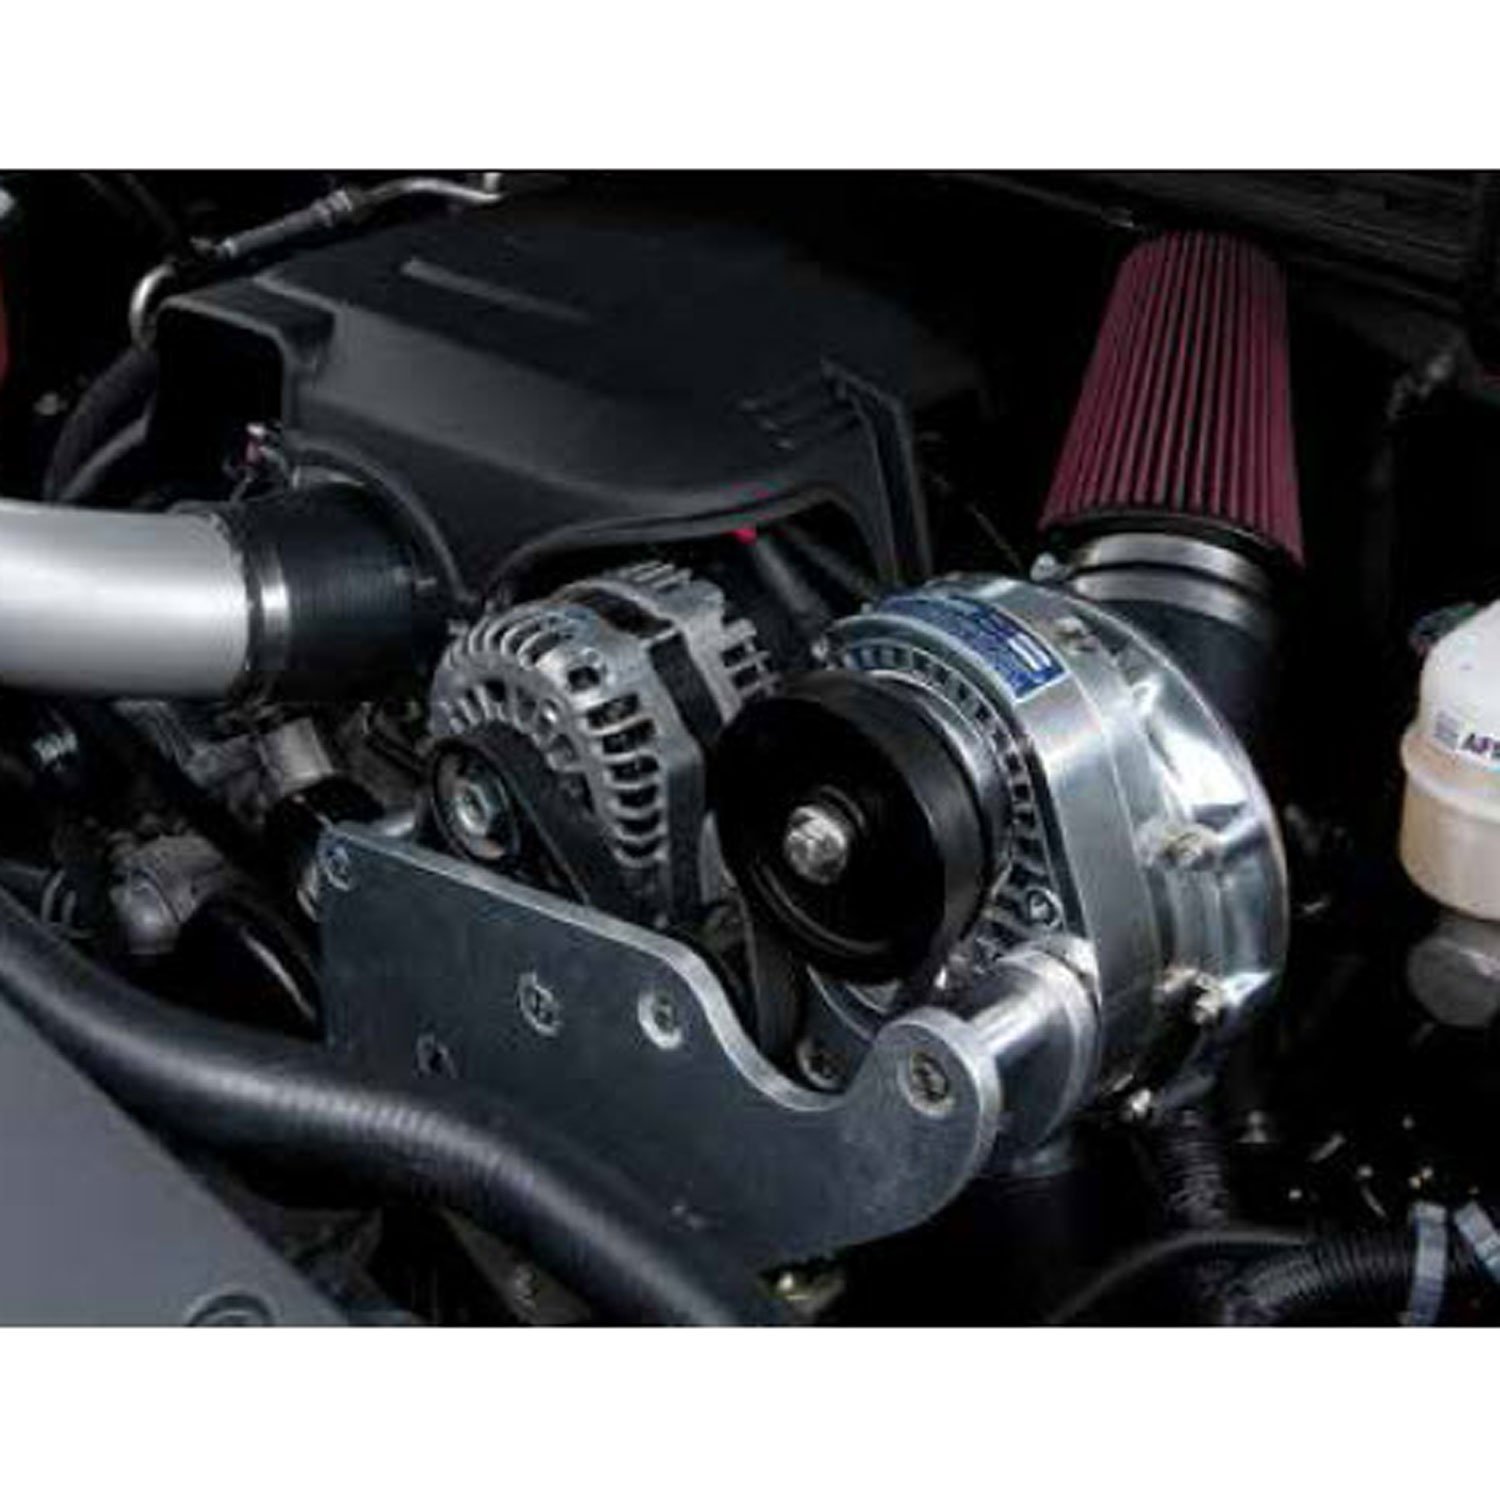 High Output Intercooled Supercharger System P-1SC-1 2007-2013 GM Truck/SUV 1500/2500